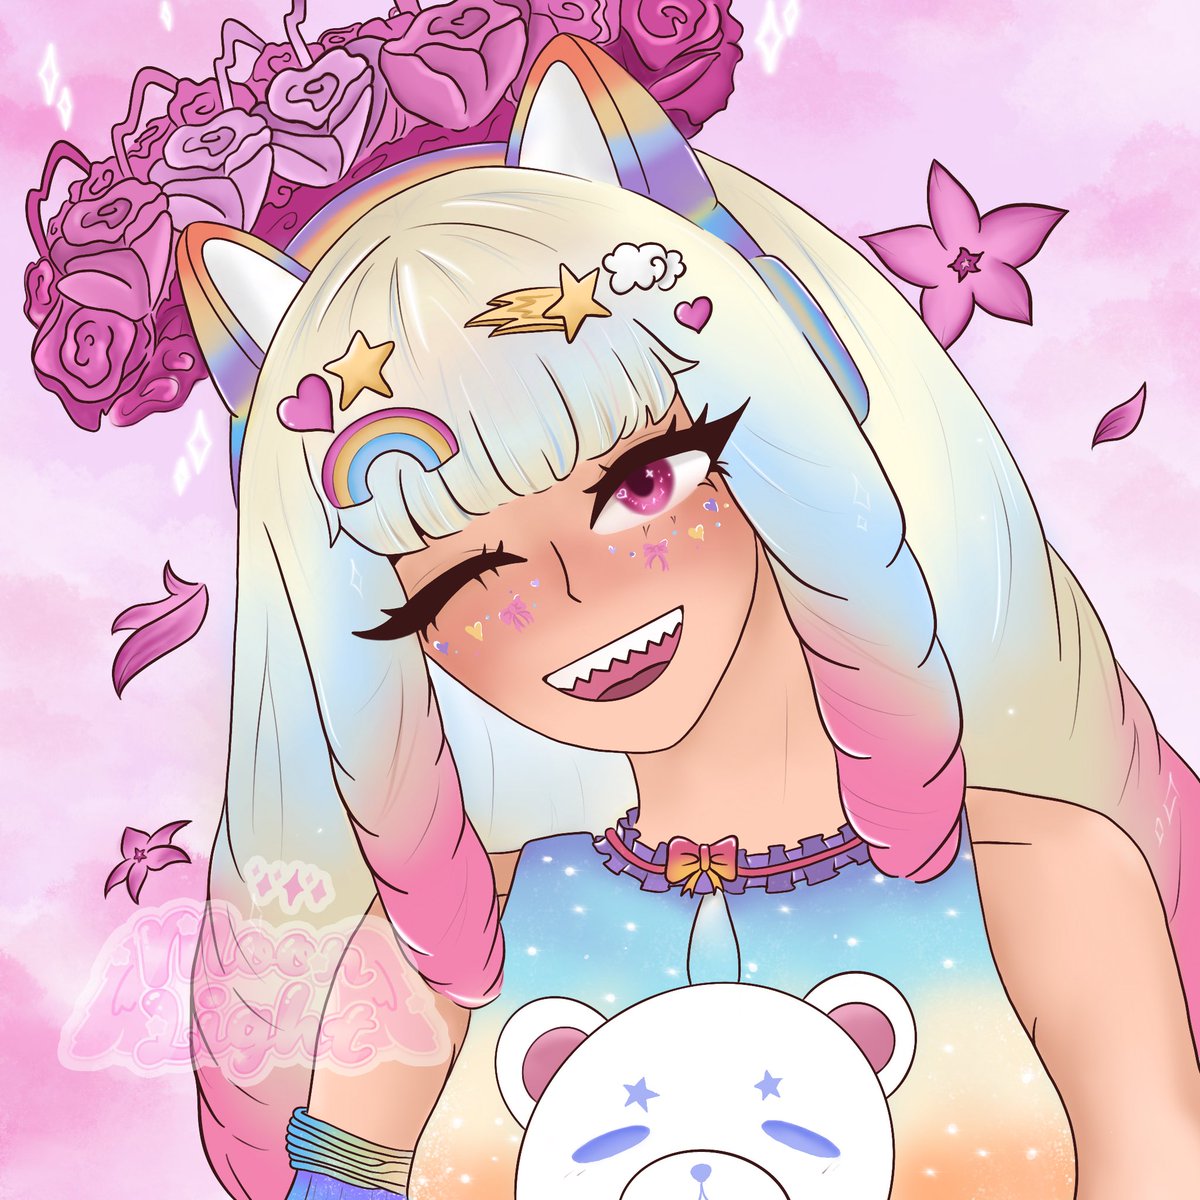 🌸— Finished finally the icon commission for @Avi_Devs 

❤️ + RT if you like it ^^

✨Commissions open <3 
✨All info on my carrd and pinned! 

#royalehigh #robloxcommission #artcommission #commissionsopen #Commission #opencommission #artmoots